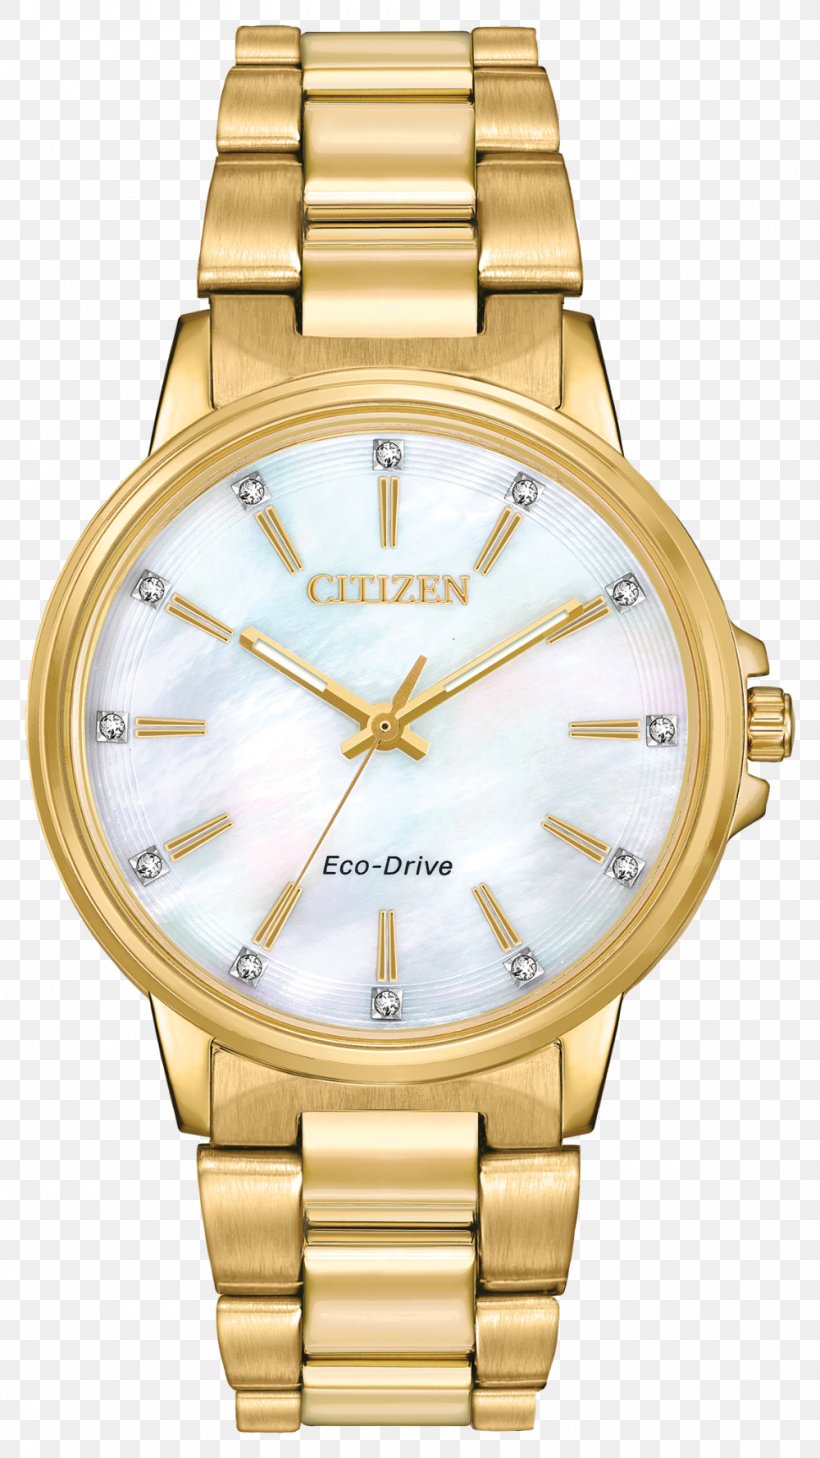 Eco-Drive Watch Seiko Citizen Holdings Automatic Quartz, PNG, 1000x1779px, Ecodrive, Automatic Quartz, Bulova, Chronograph, Citizen Holdings Download Free